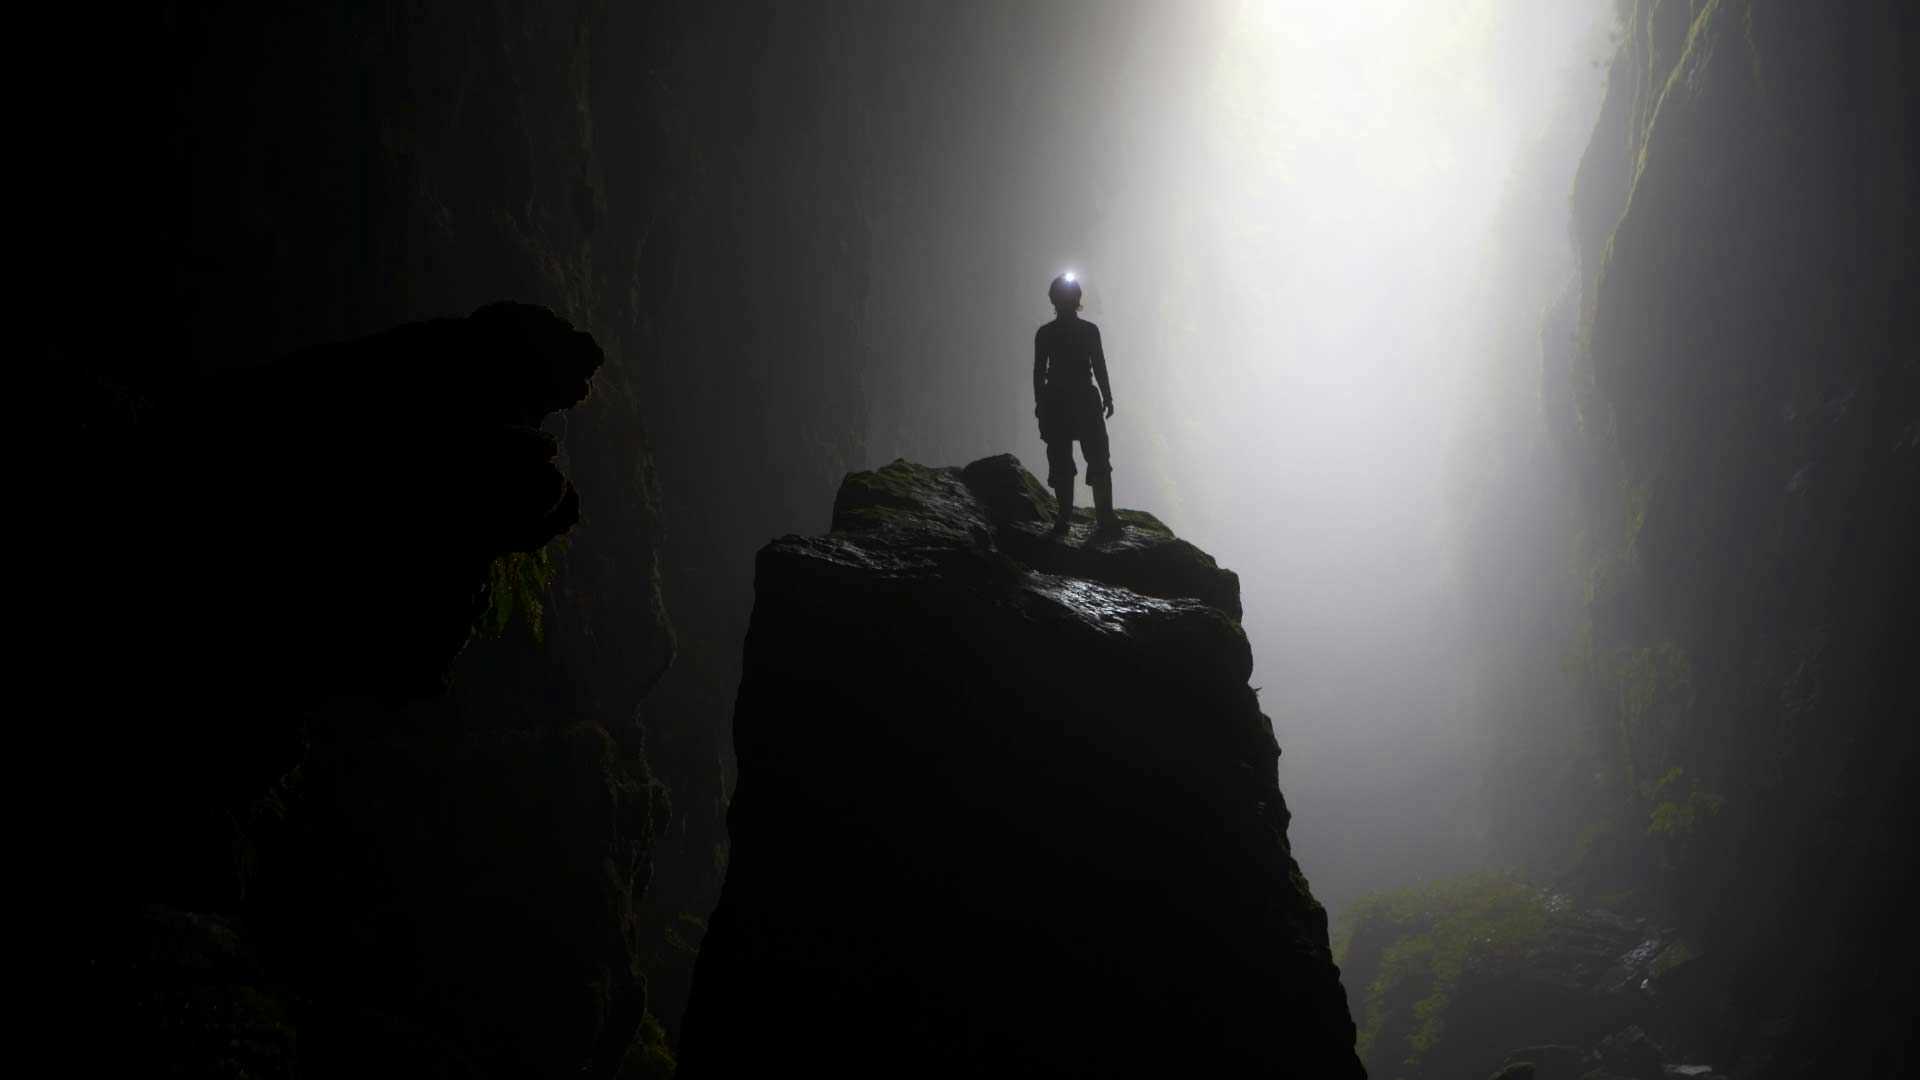 Person standing in a cavern in The Waitomo Caves